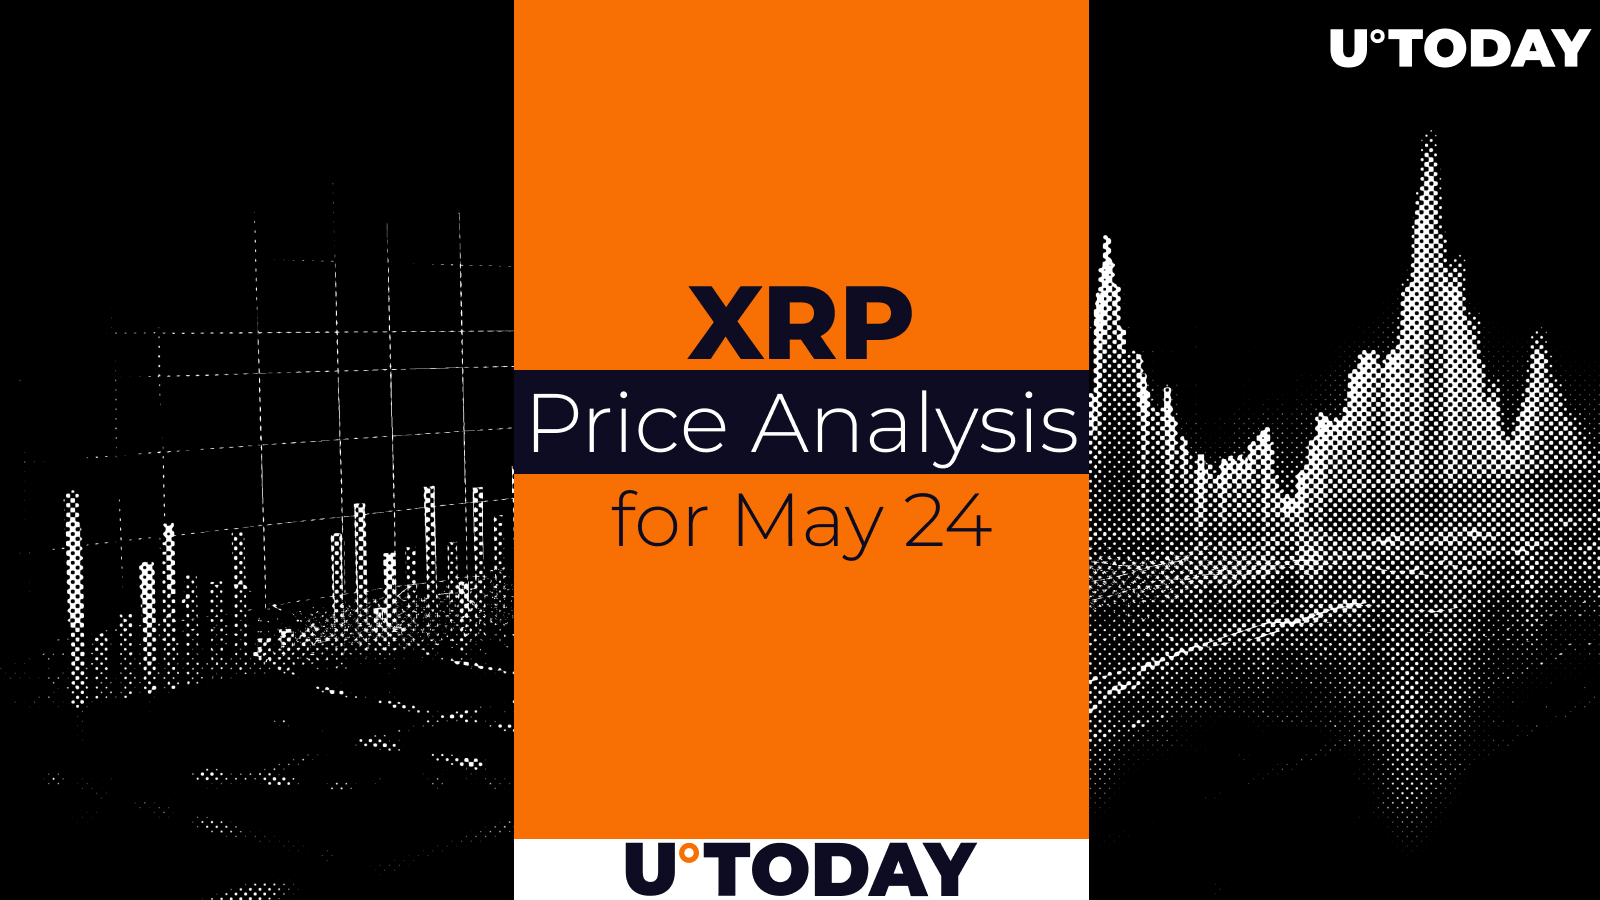 XRP Price Prediction for May 24